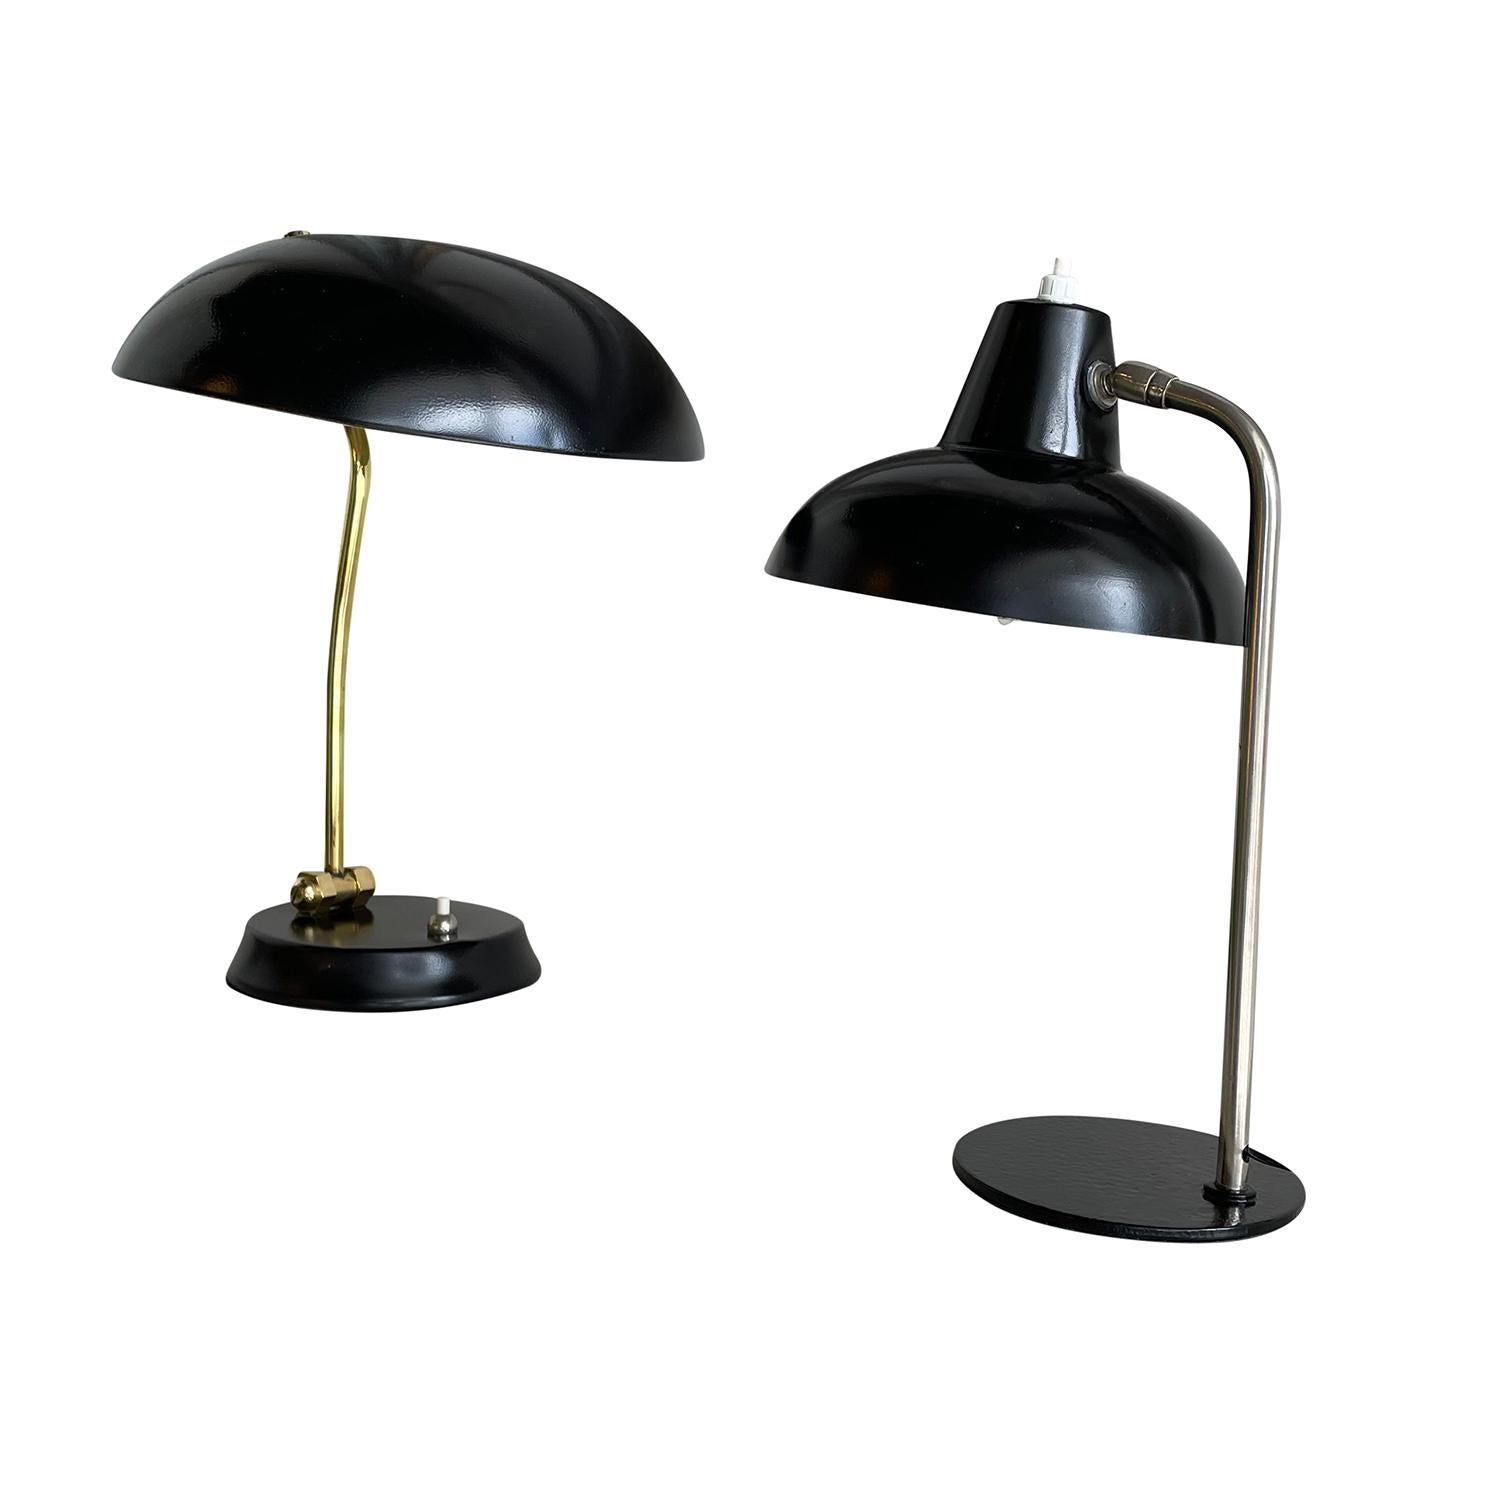 Hand-Painted 20th Century Black Italian Similar Pair of Vintage Metal, Brass Table Lamps For Sale